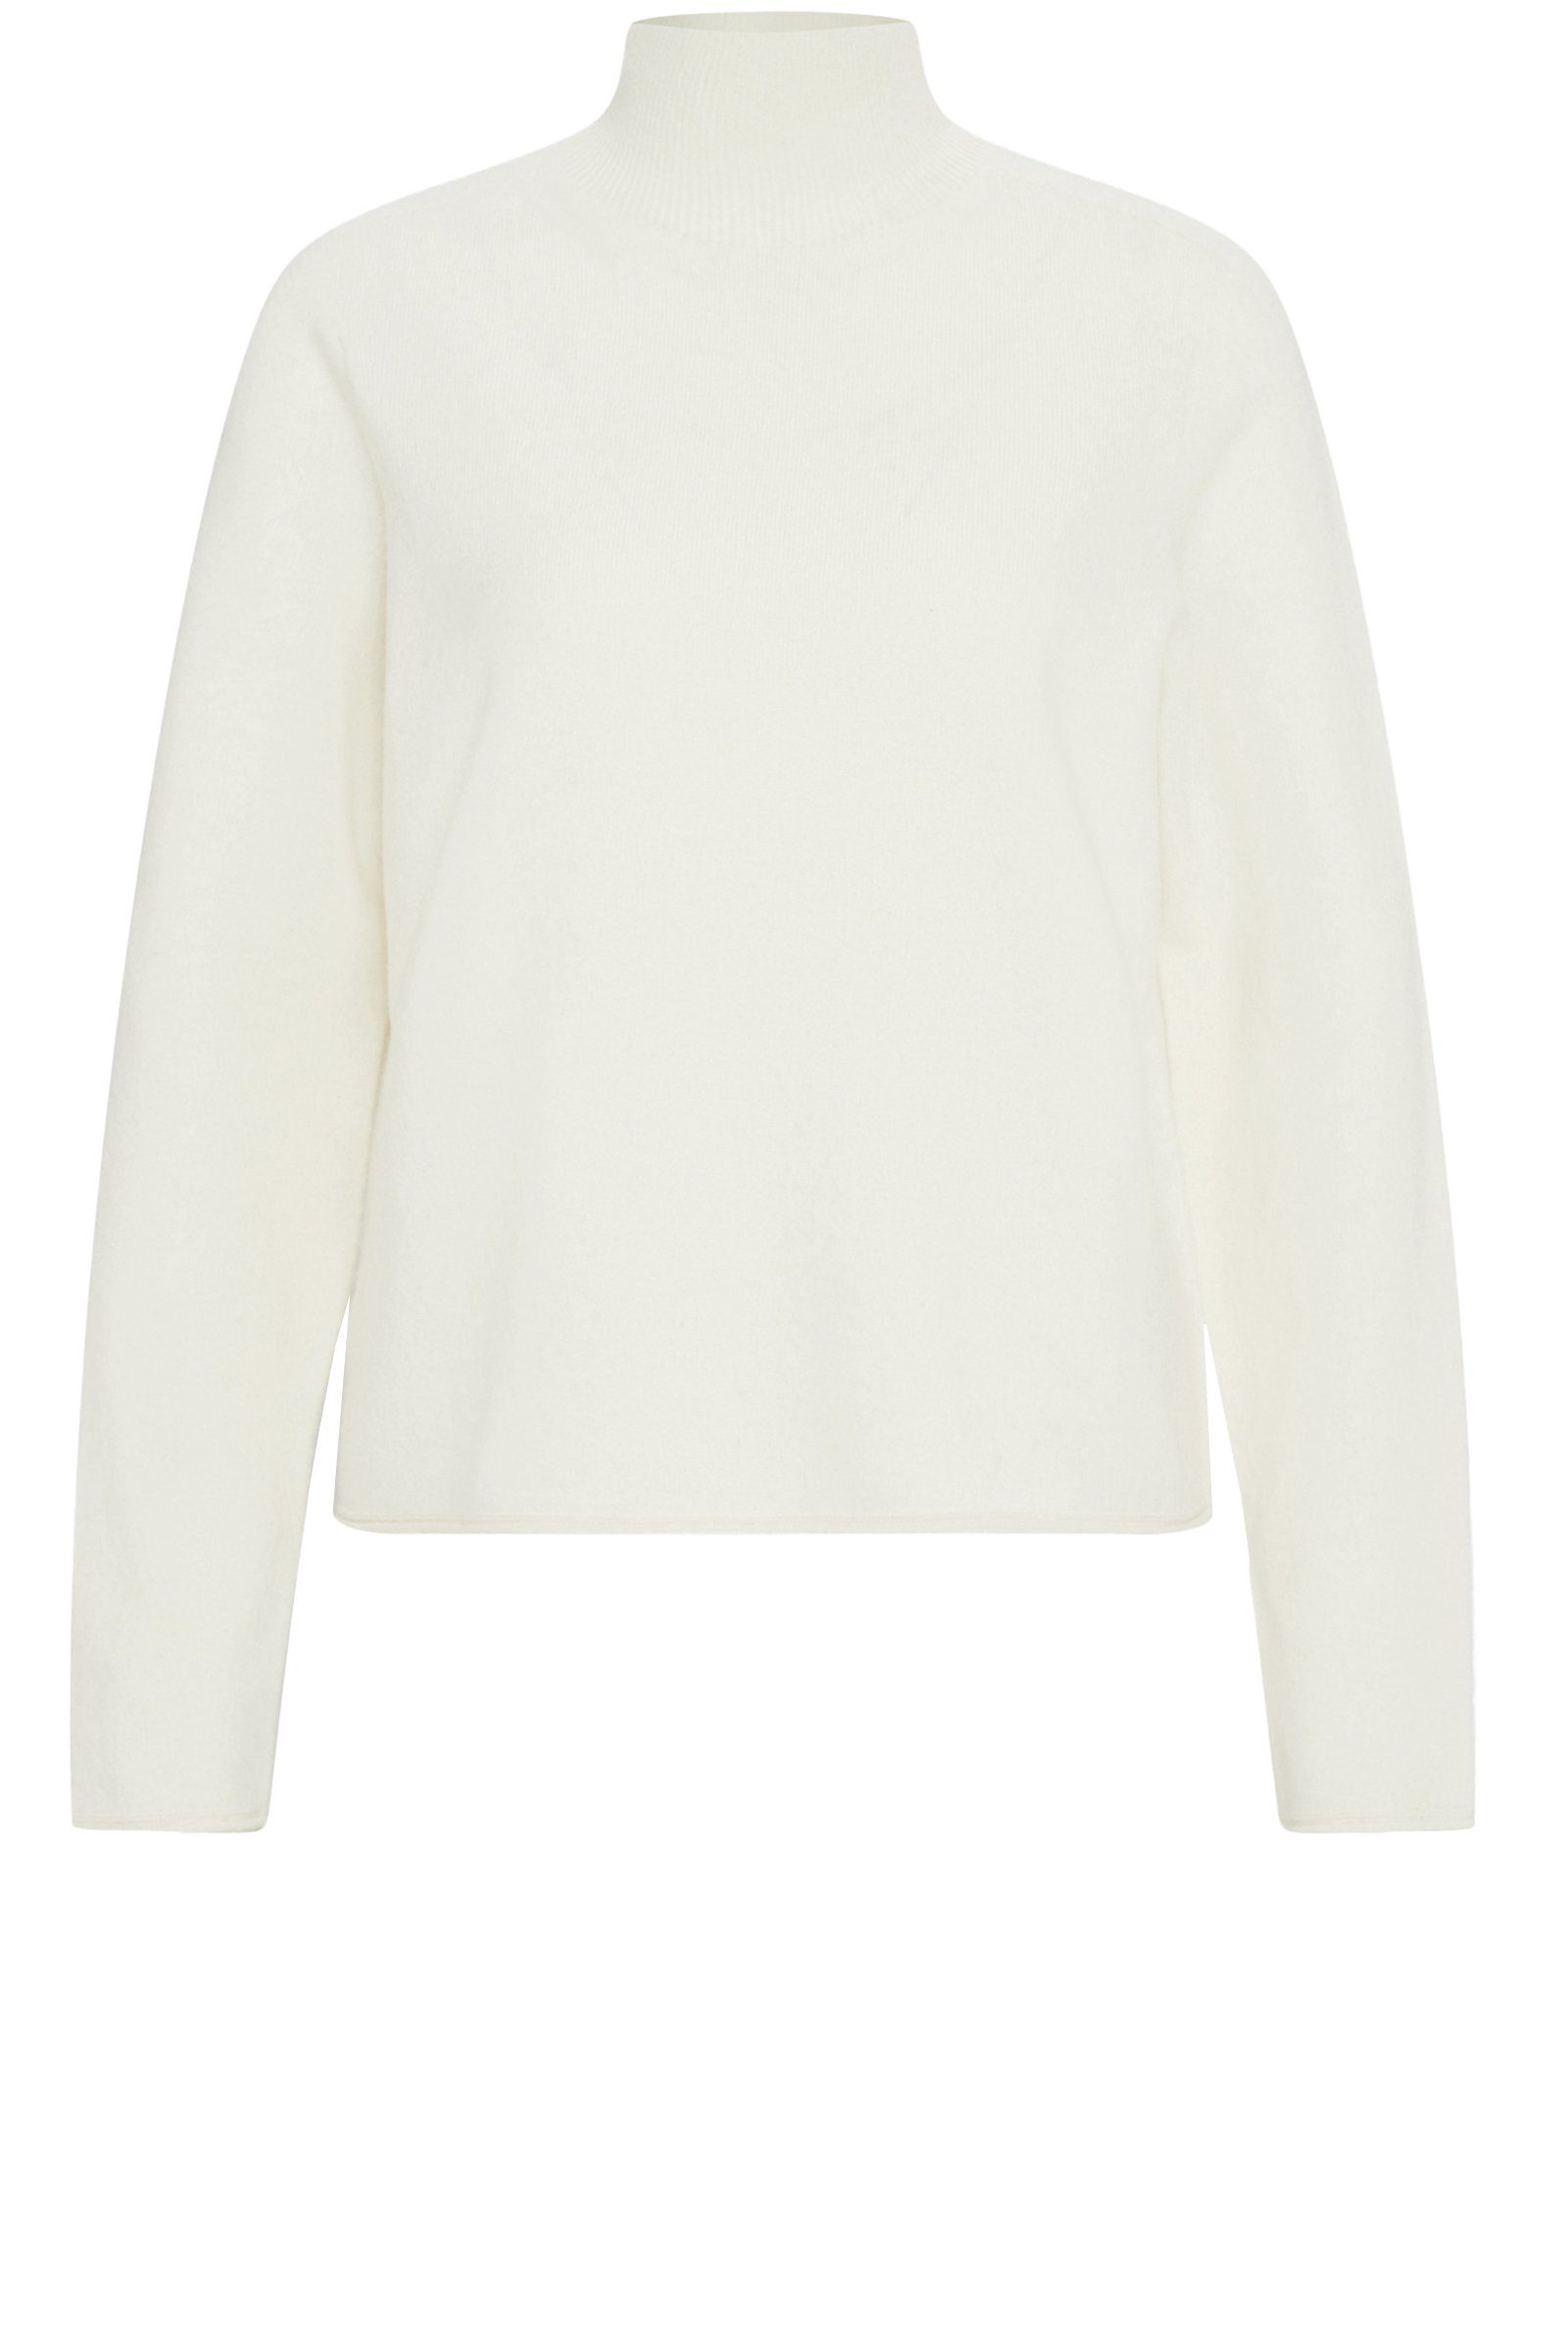 (1902) (1-tlg) Off-White Strickpullover Drykorn Daralis